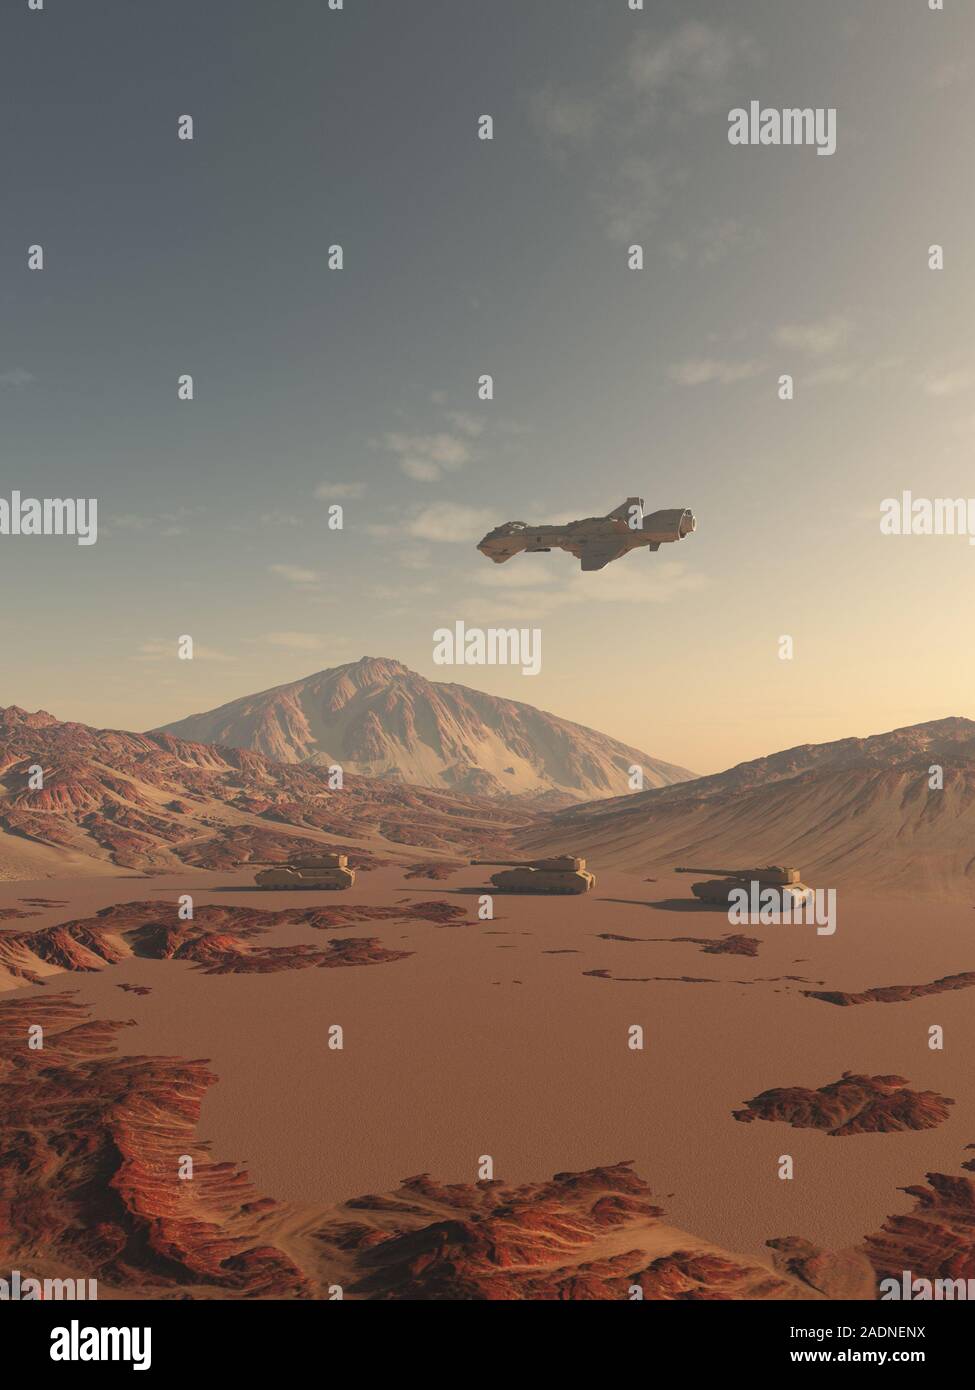 Convoy of Future Tanks and Spaceship crossing a Mars-like Red Desert Planet Stock Photo